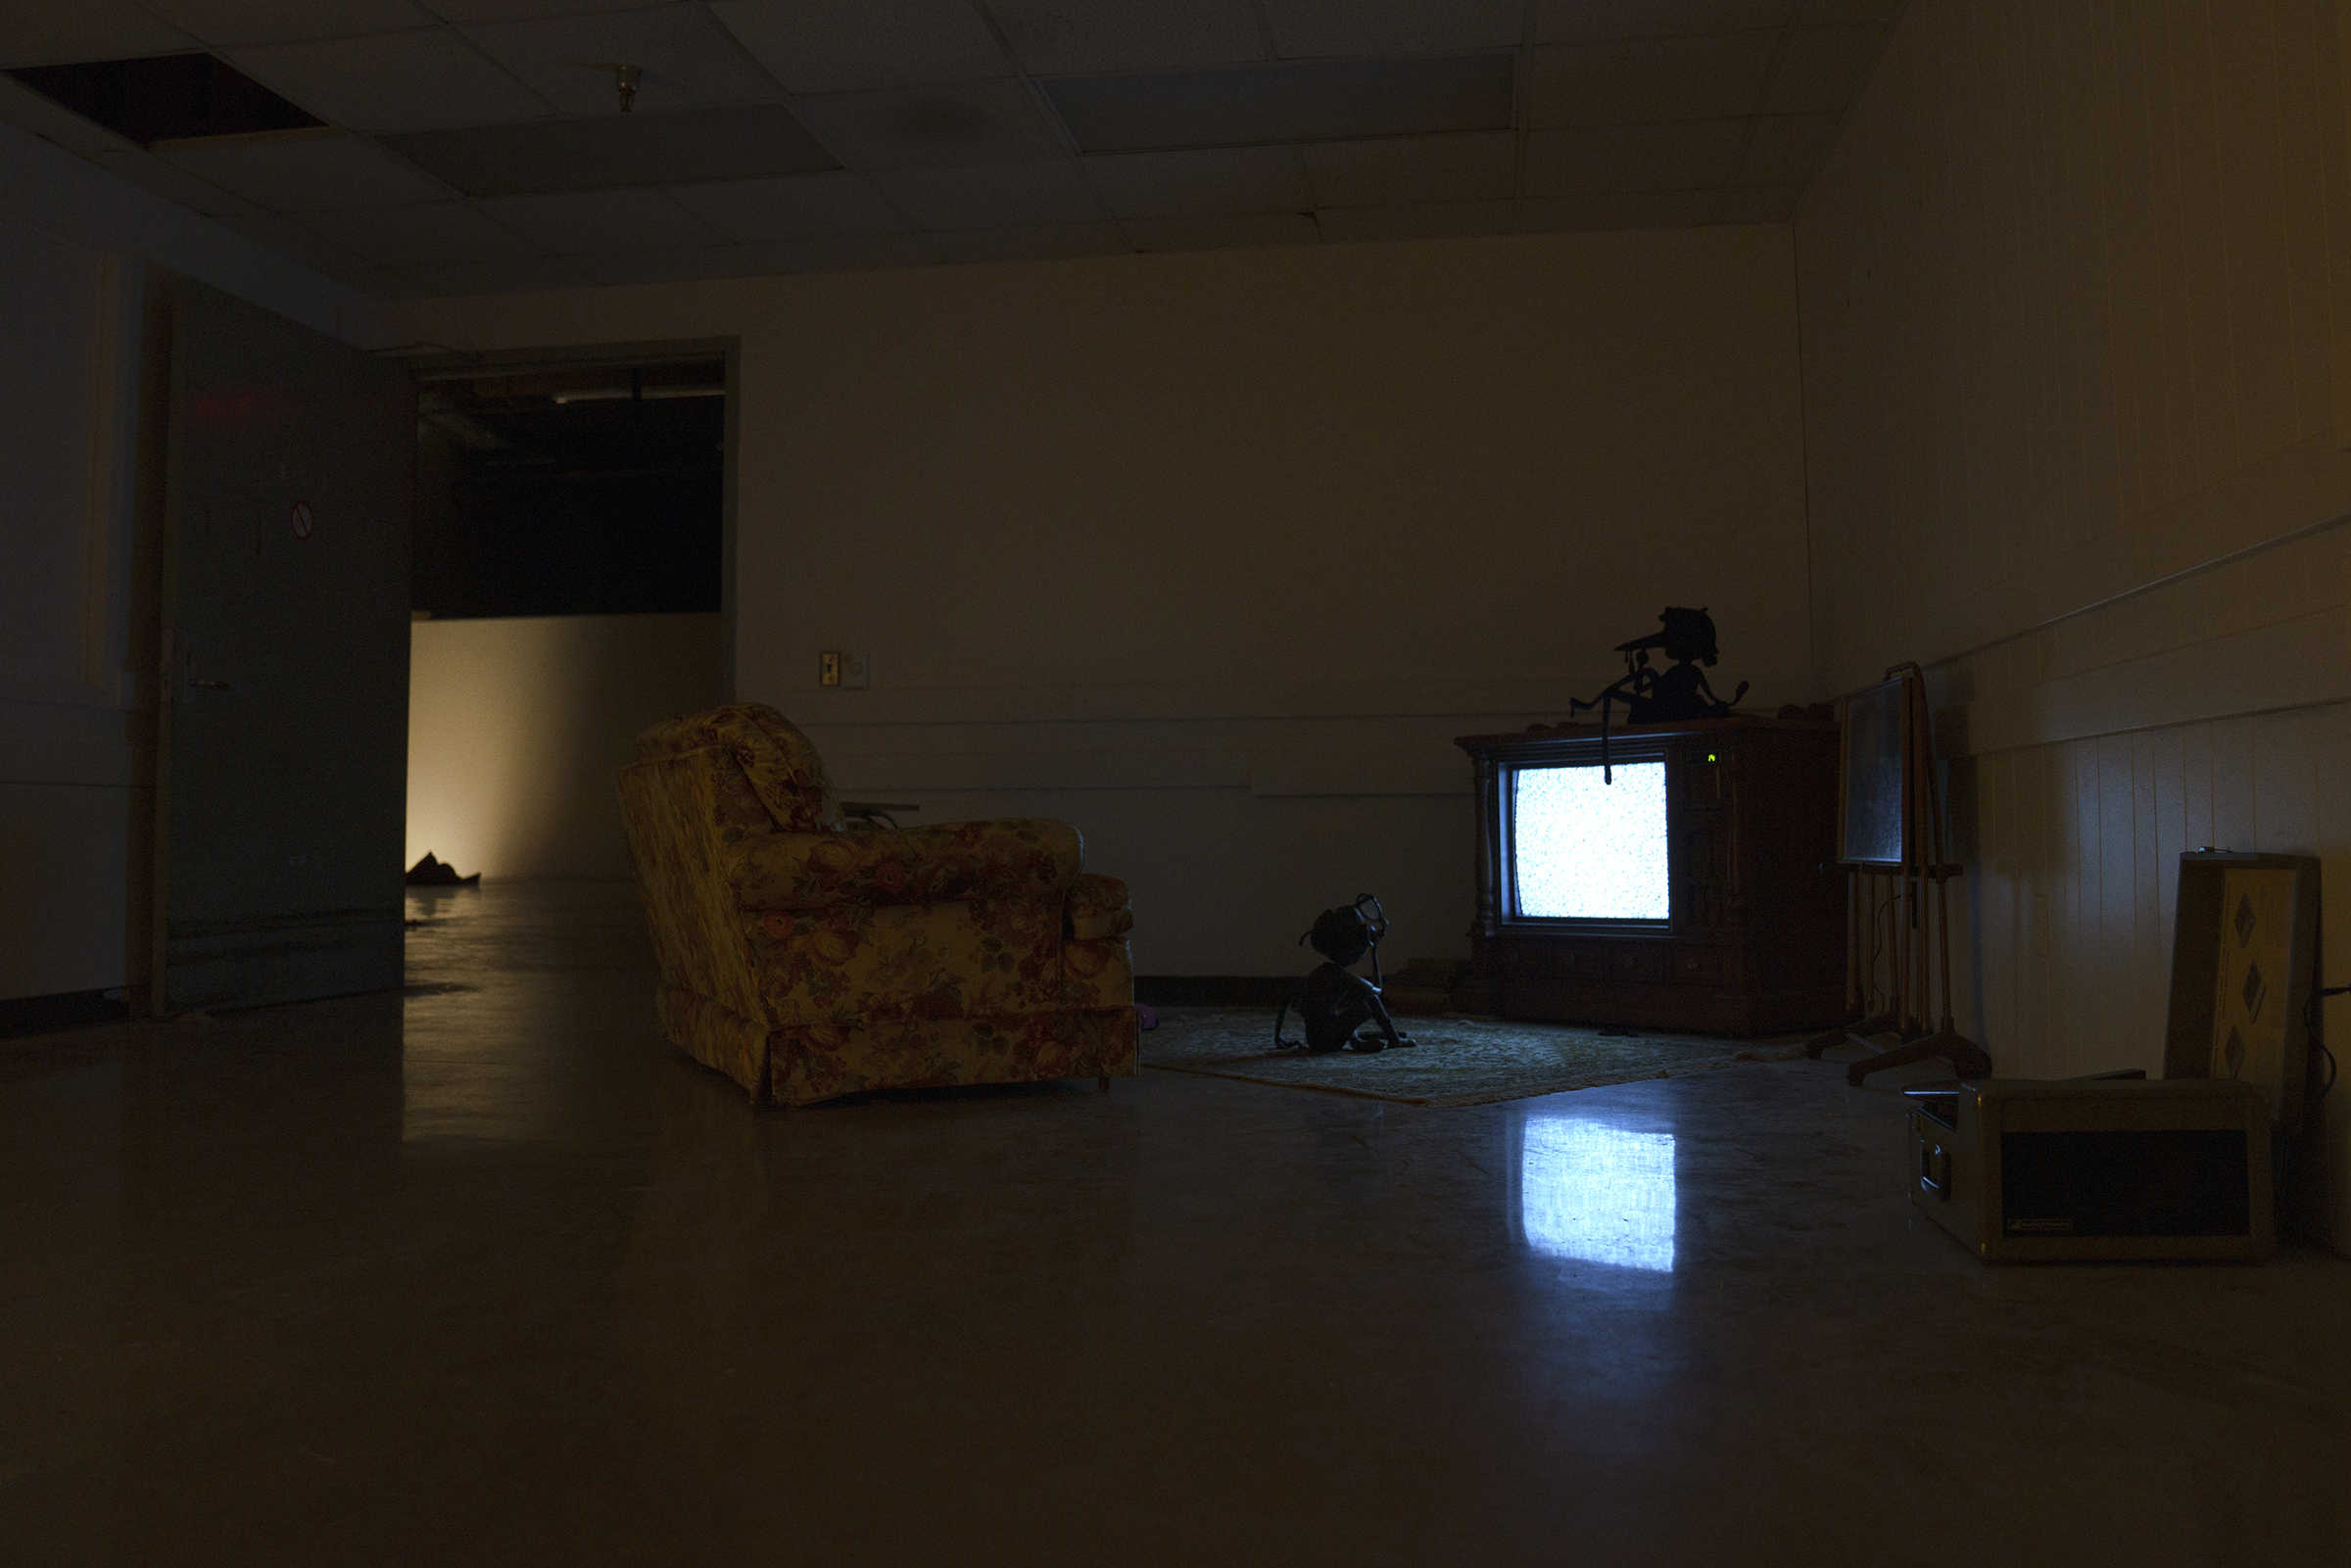 Installation view of a | bide Master of Fine Arts Exhibition by Jamie Jacobson at the BackSpace Gallery, Art Lofts, University of Wisconsin-Madison.